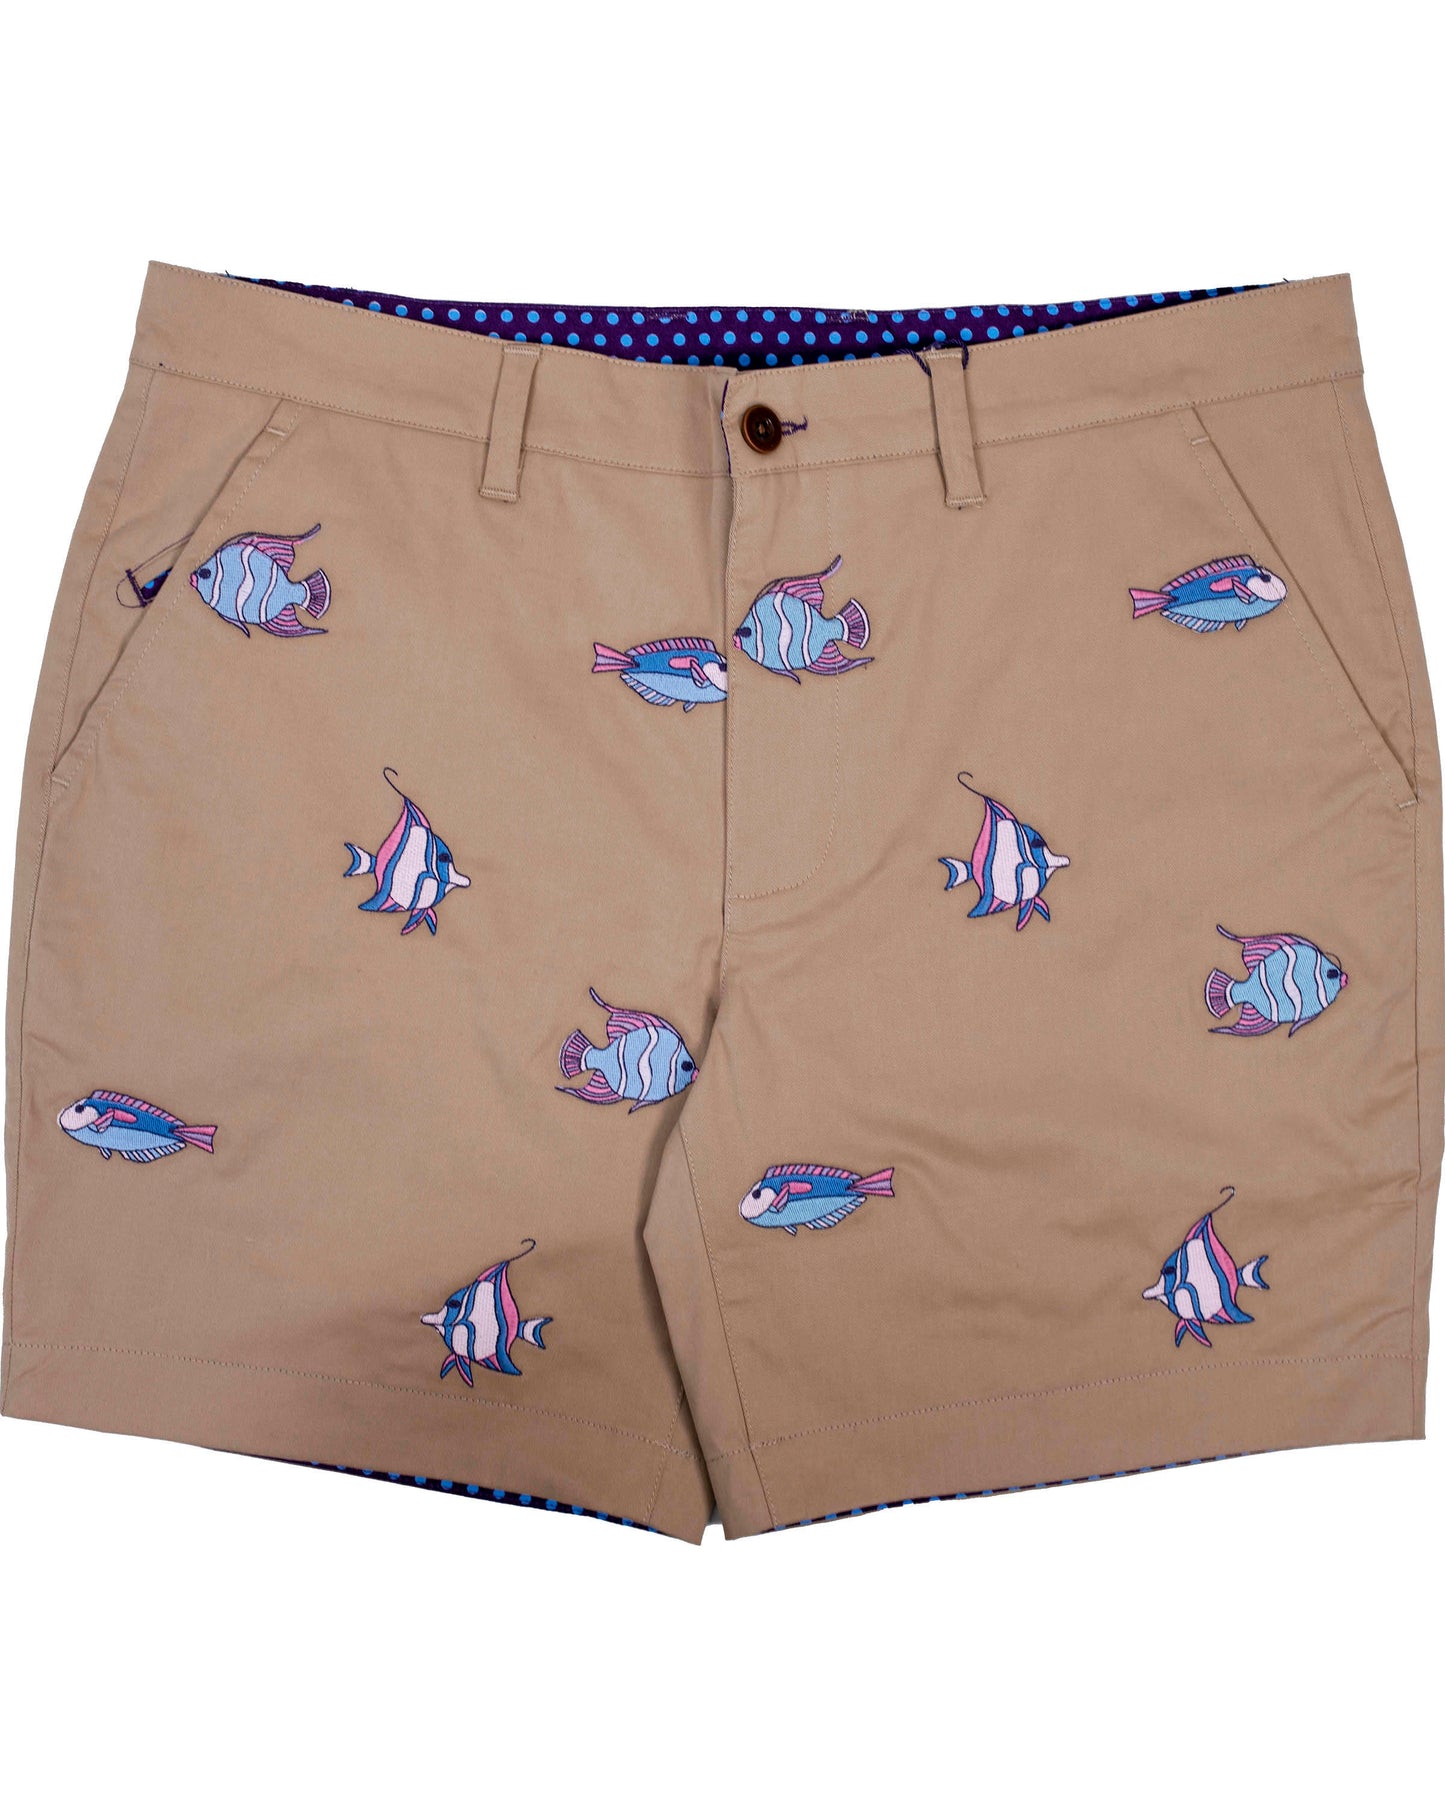 EDWARD FISH EMBROIDERY SHORTS IN SAND